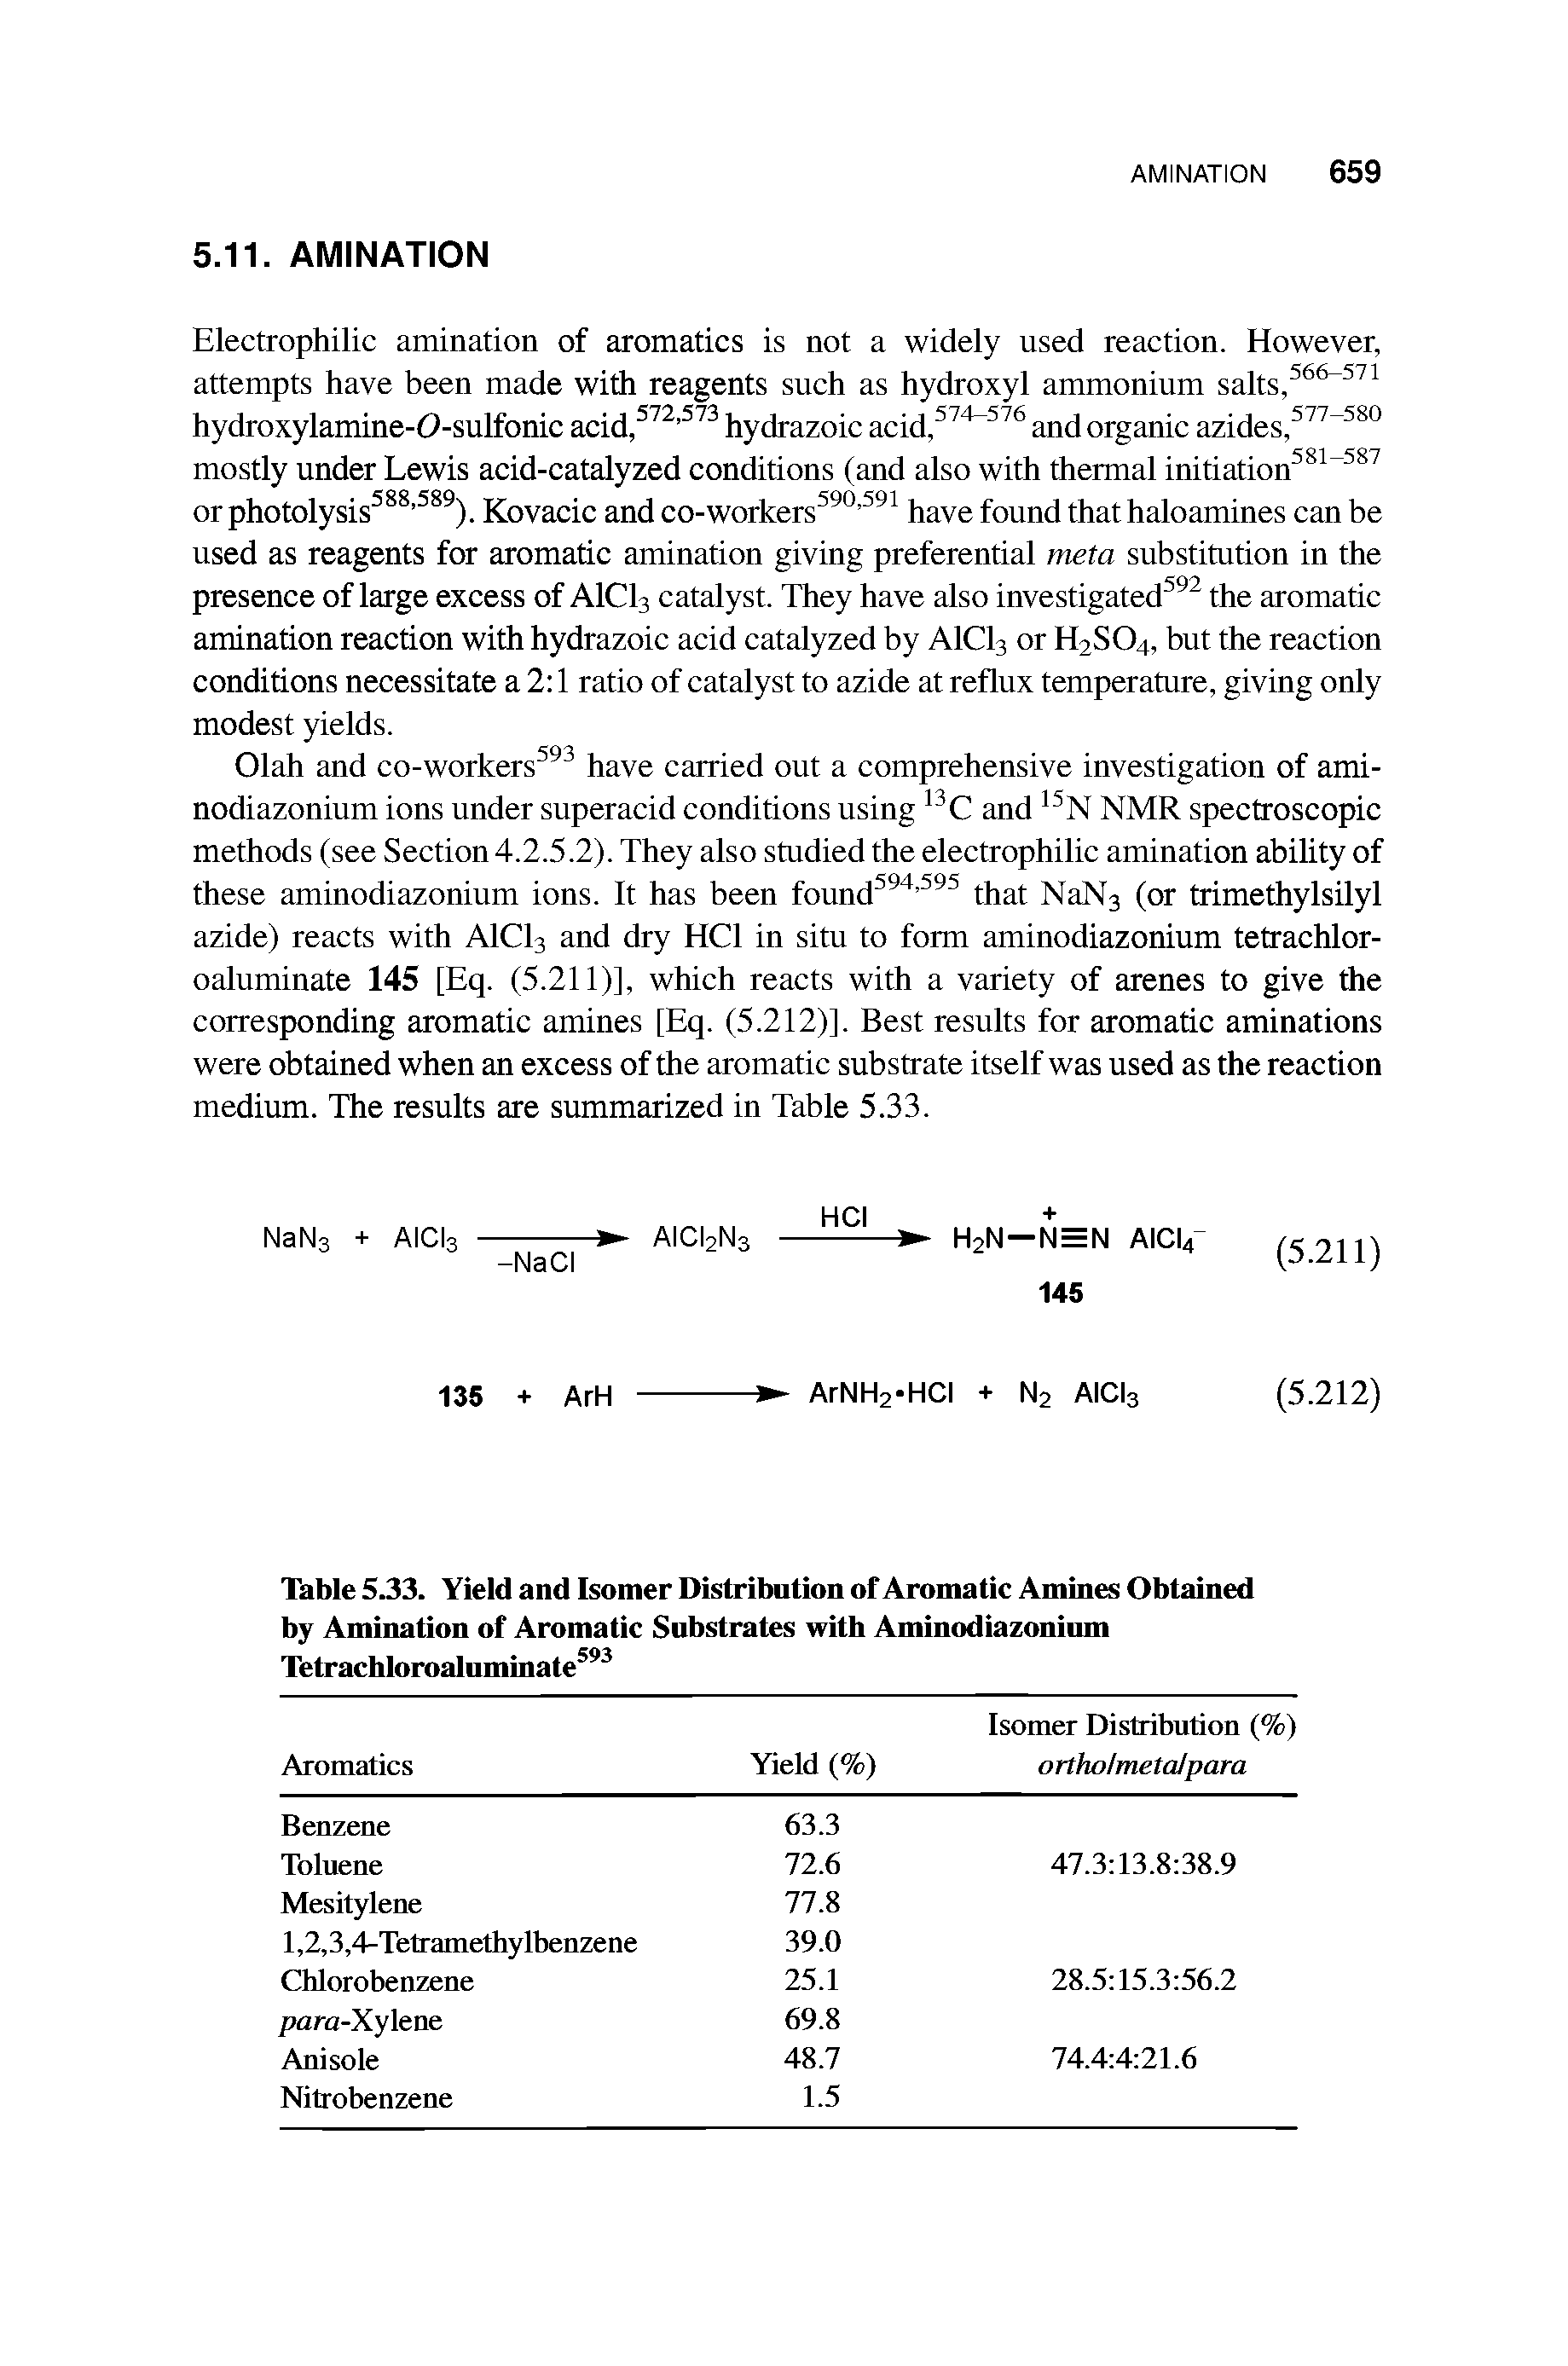 Table 5.33. Yield and Isomer Distribution of Aromatic Amines Obtained by Amination of Aromatic Substrates with Aminodiazoninm Tetrachloroaluminate593...